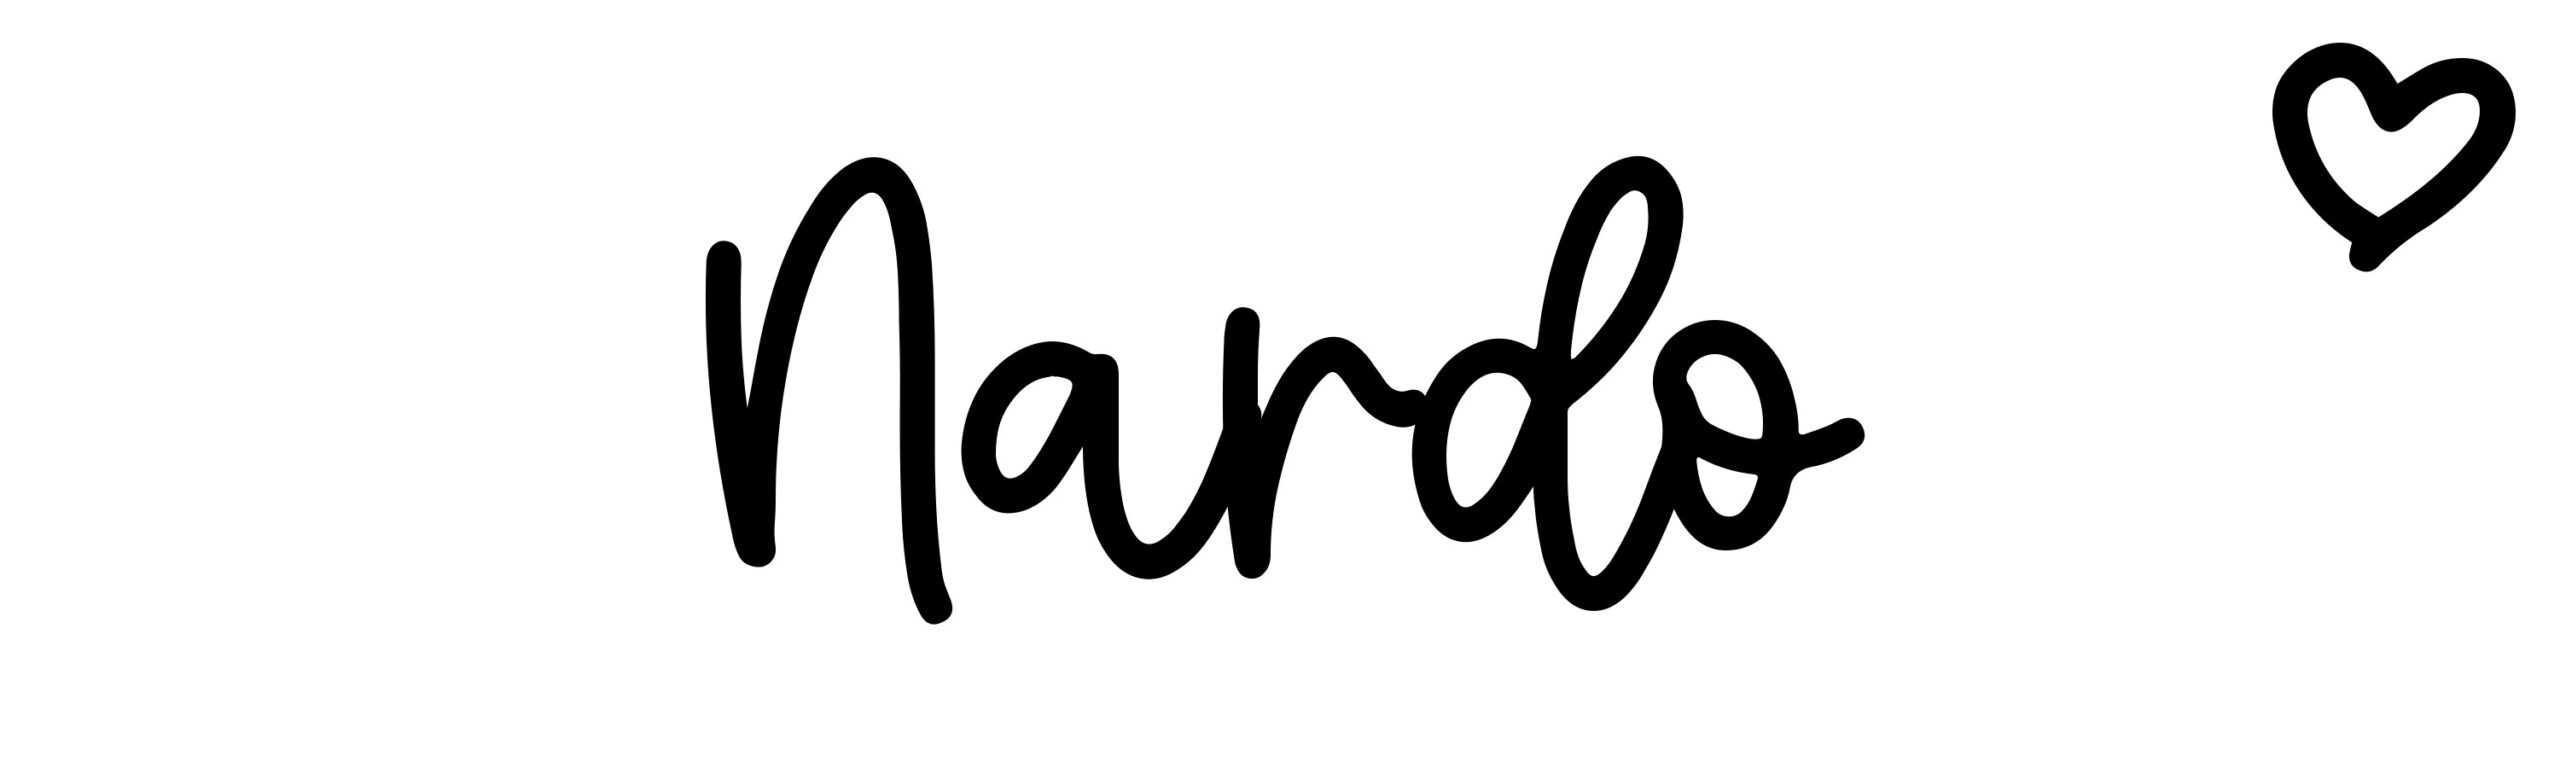 Nardo - Name meaning, origin, variations and more